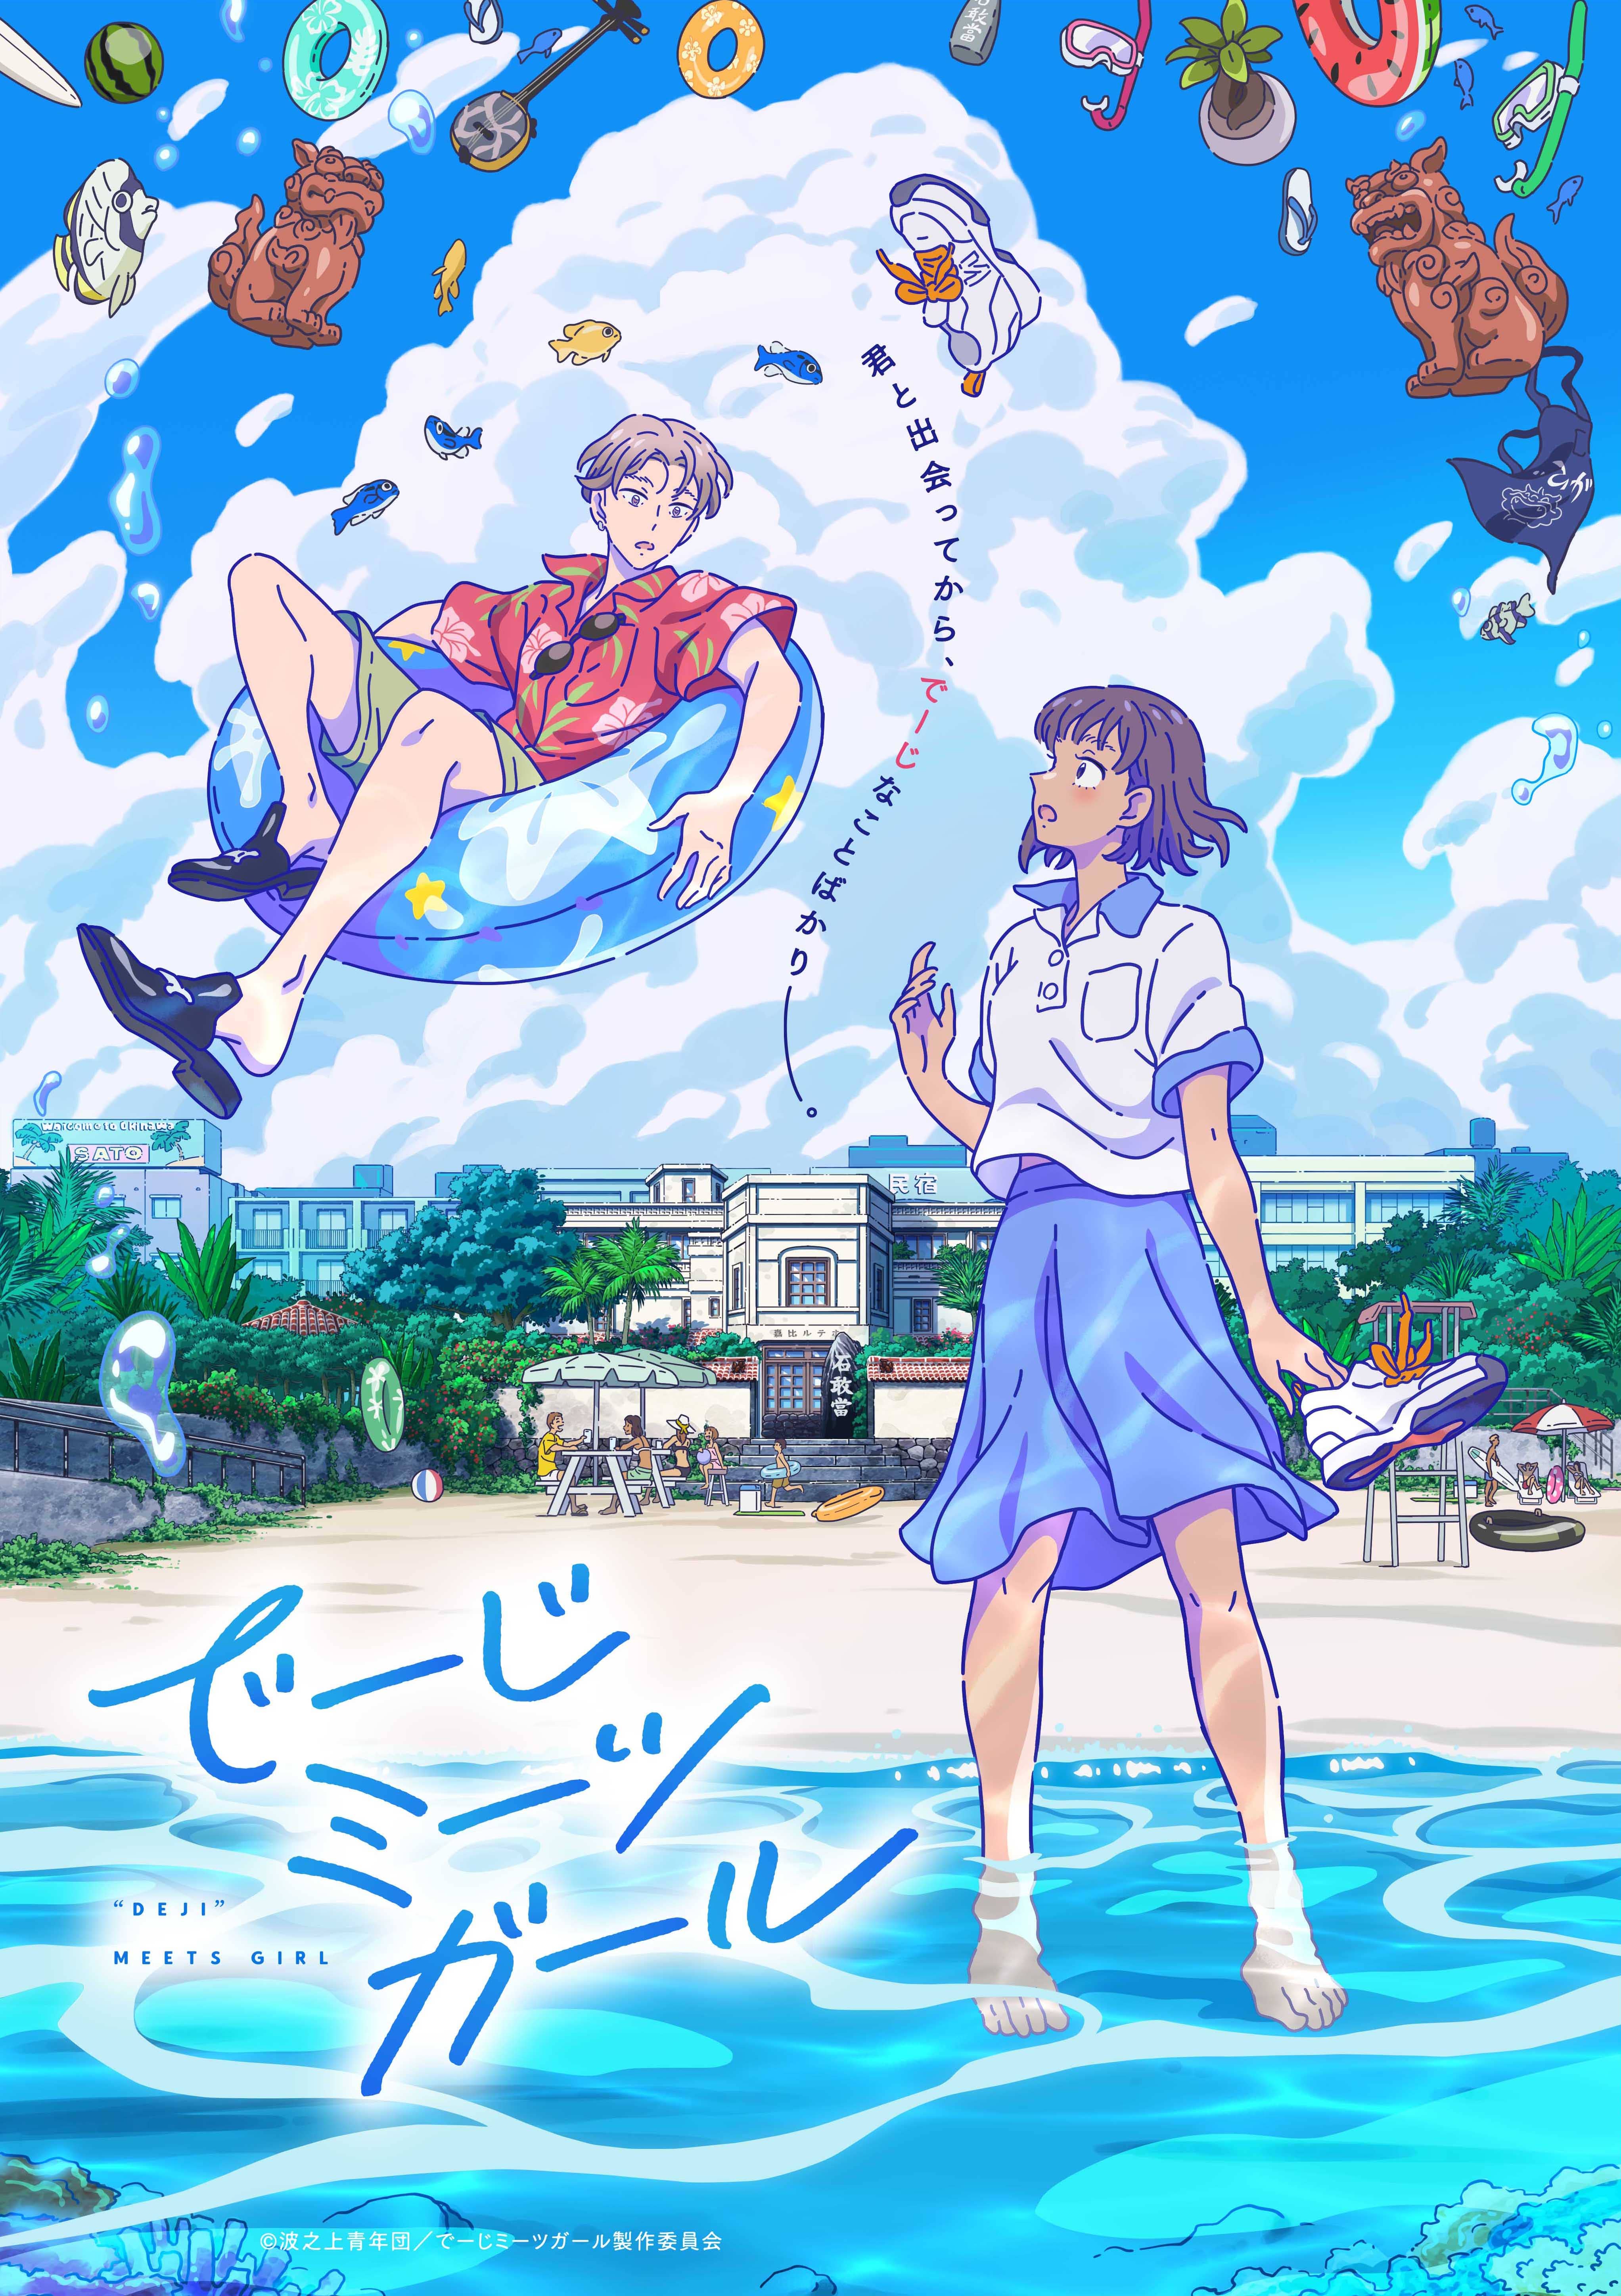 A key visual for the Deiji Meets Girl TV anim, featuring main characters Maise Higa and Ichiro Suzuki at the beach outside of a hotel resort. Maise dips her feet in the surf, while Ichiro is floating in an intertube in midair along with various fish, knicknacks, tourist gifts, and swimming gear.